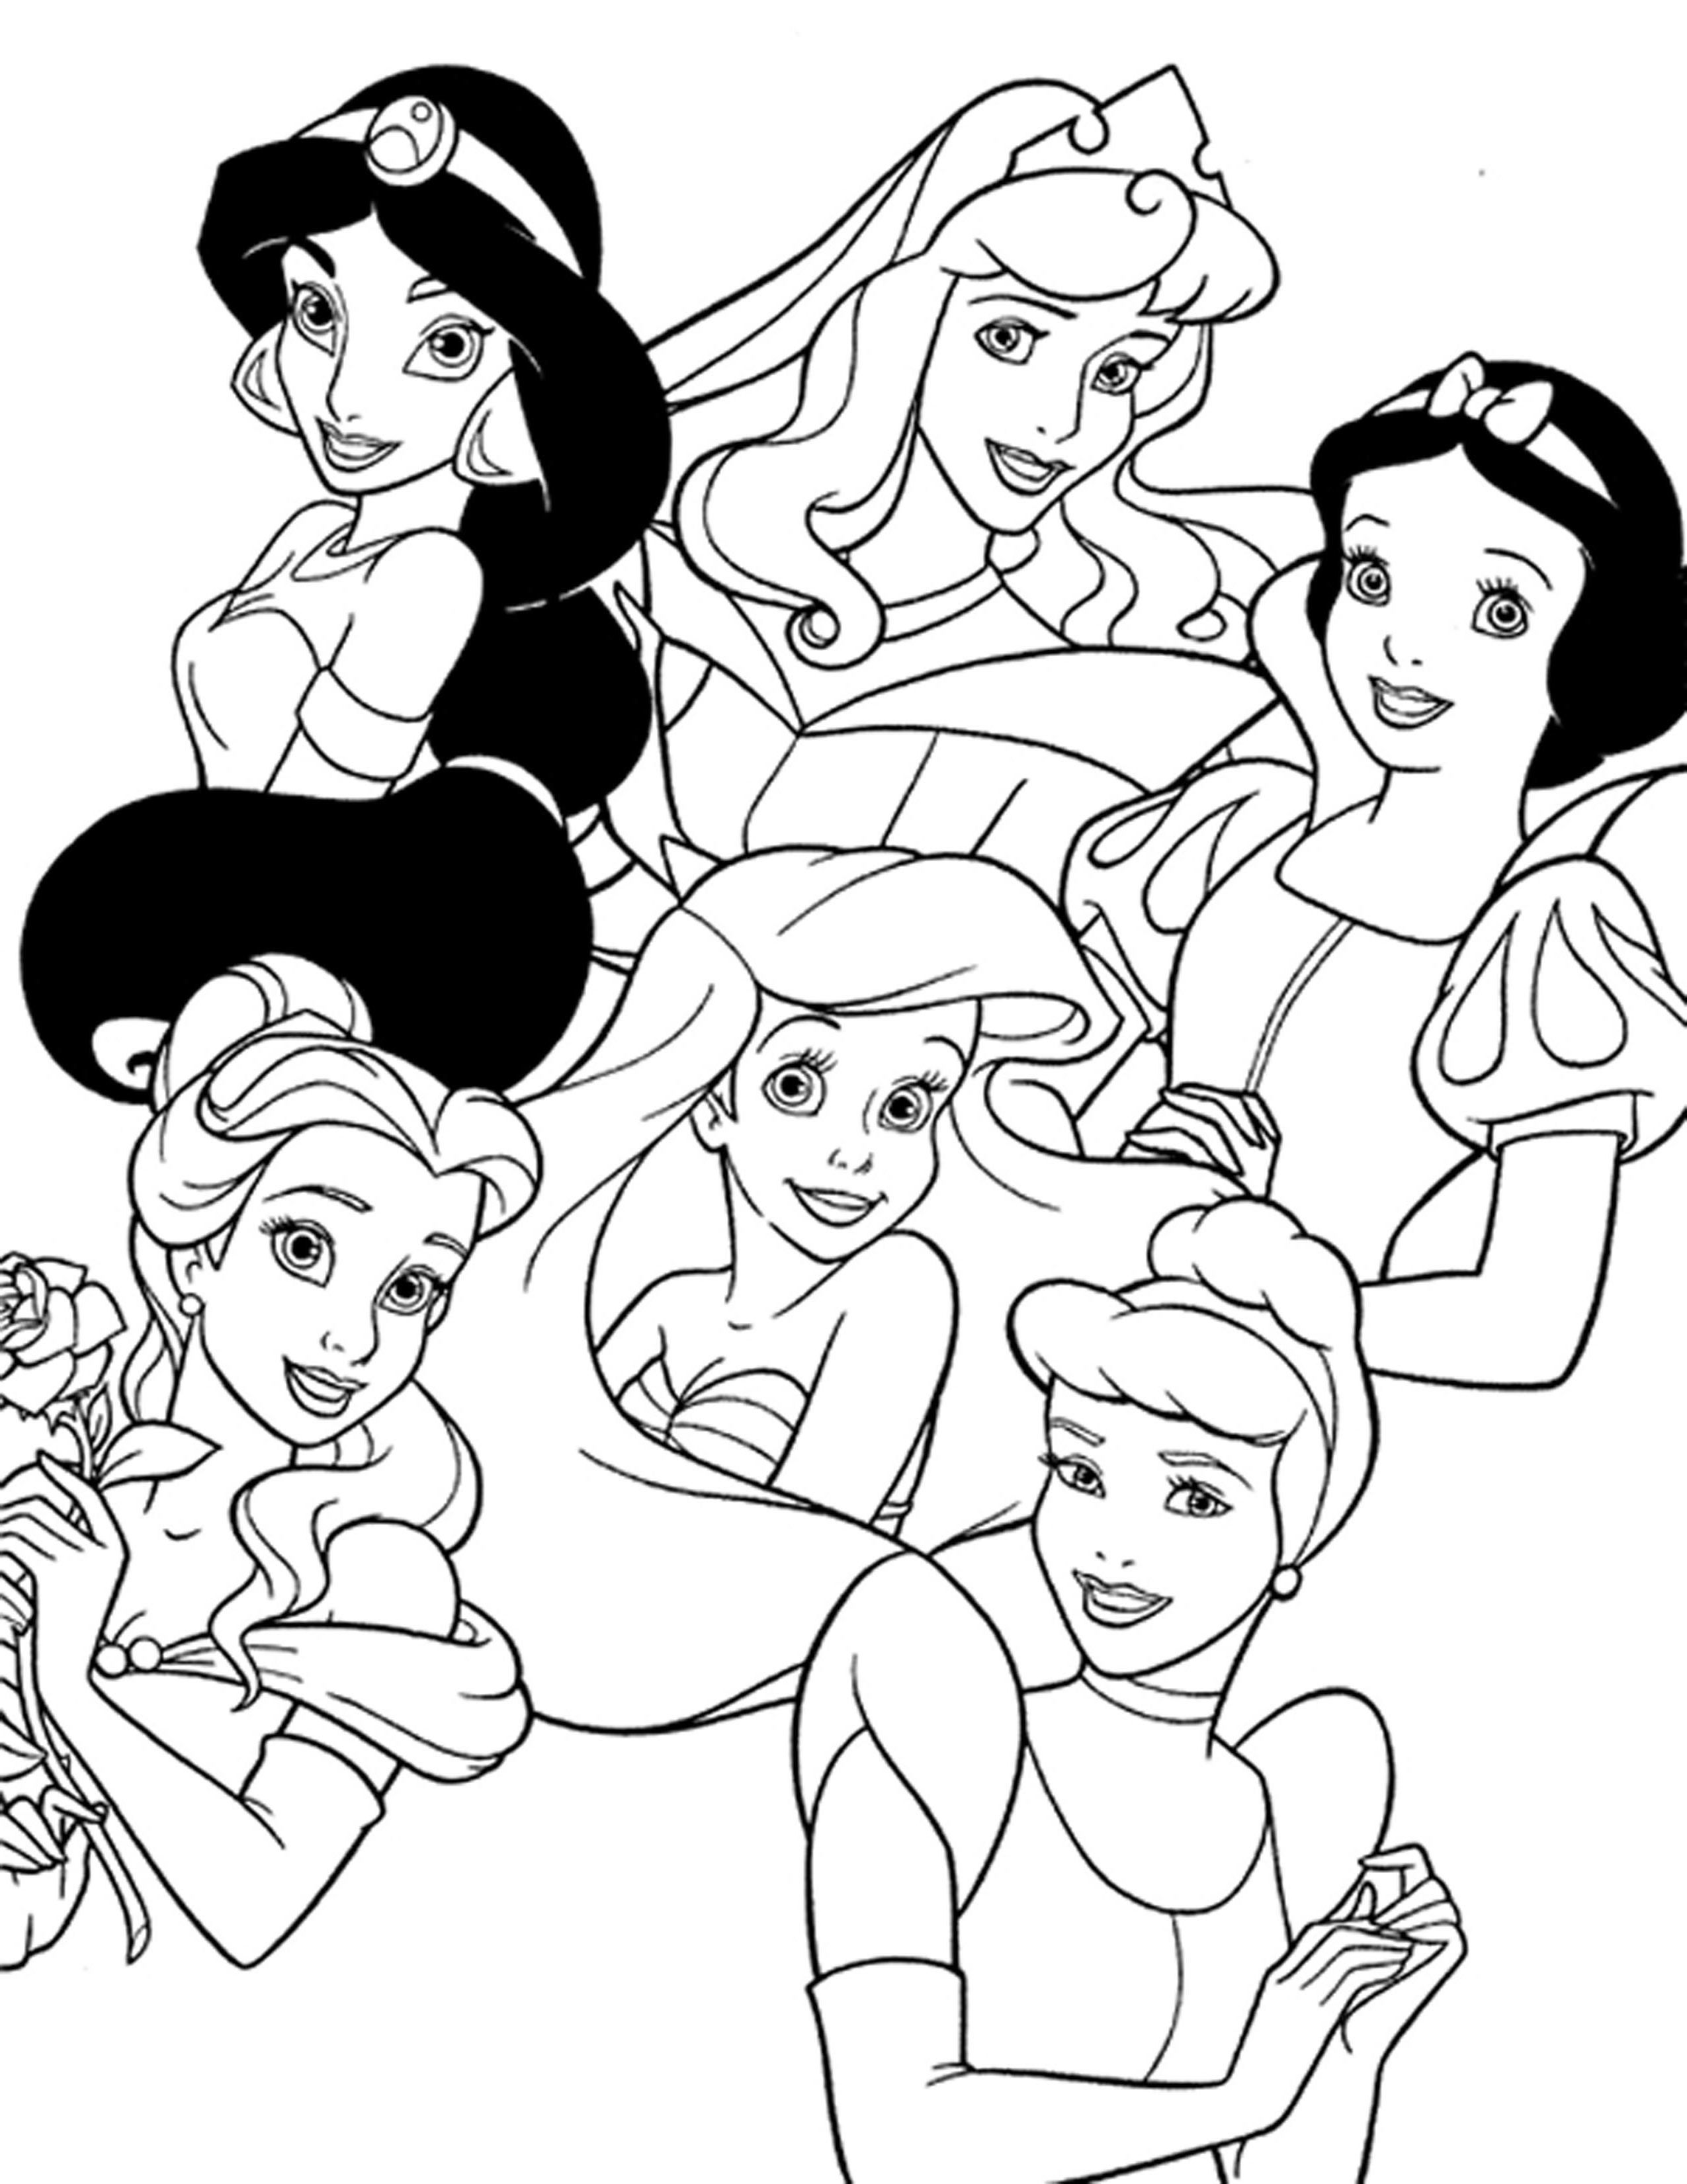 Advanced Snow White Coloring Pages - Coloring Pages For All Ages